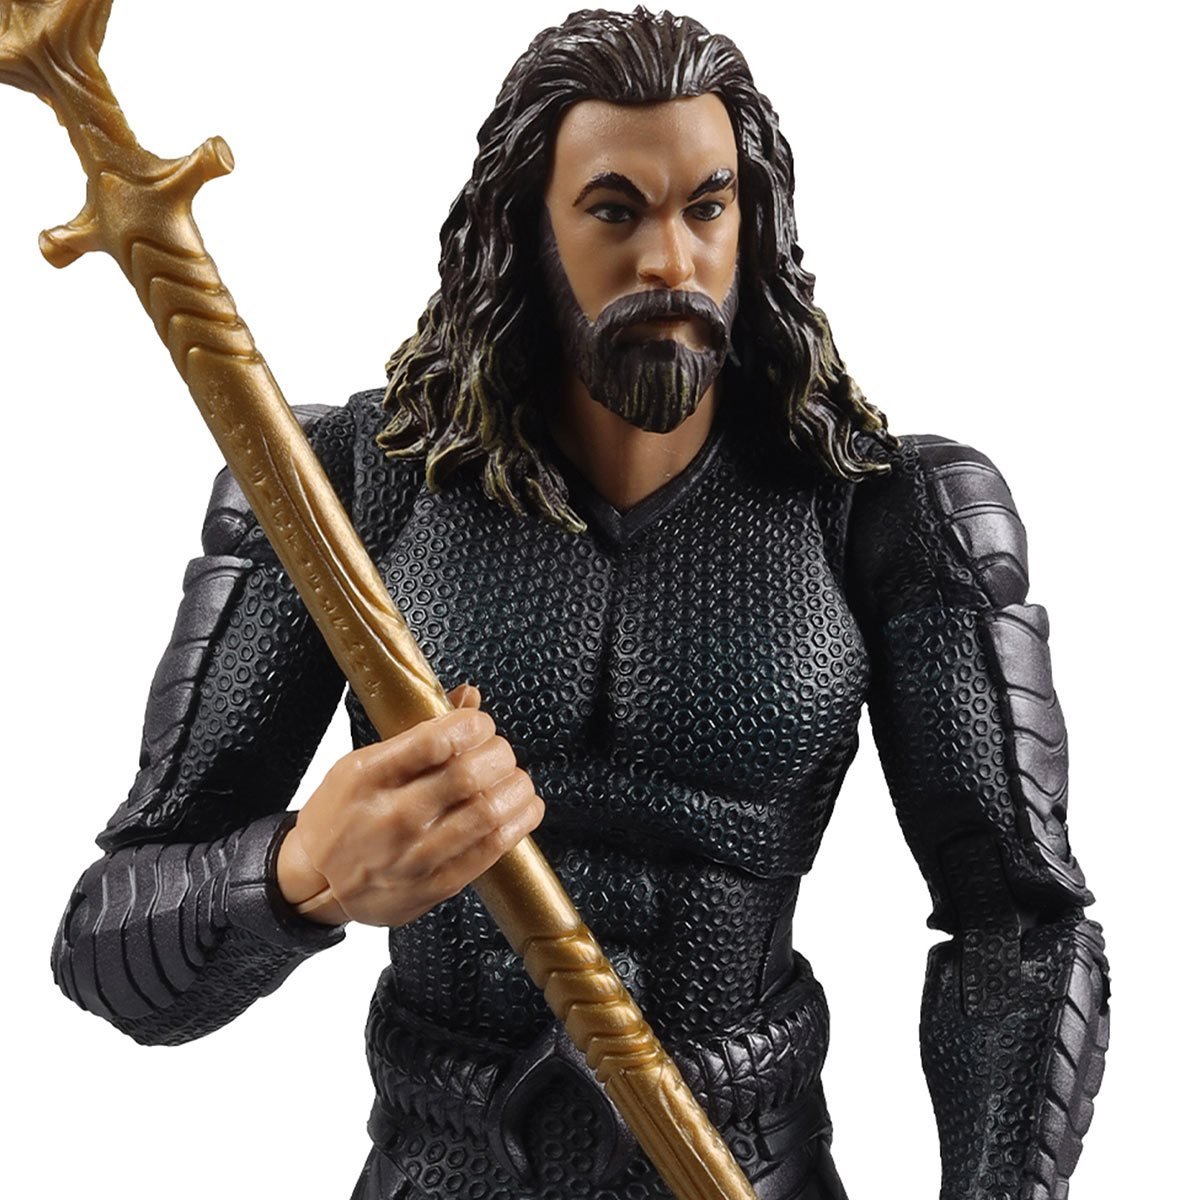 MCFARLANE DC Multiverse Aquaman and the Lost Kingdom Movie Aquaman with Stealth Suit 7-Inch Scale Action Figure